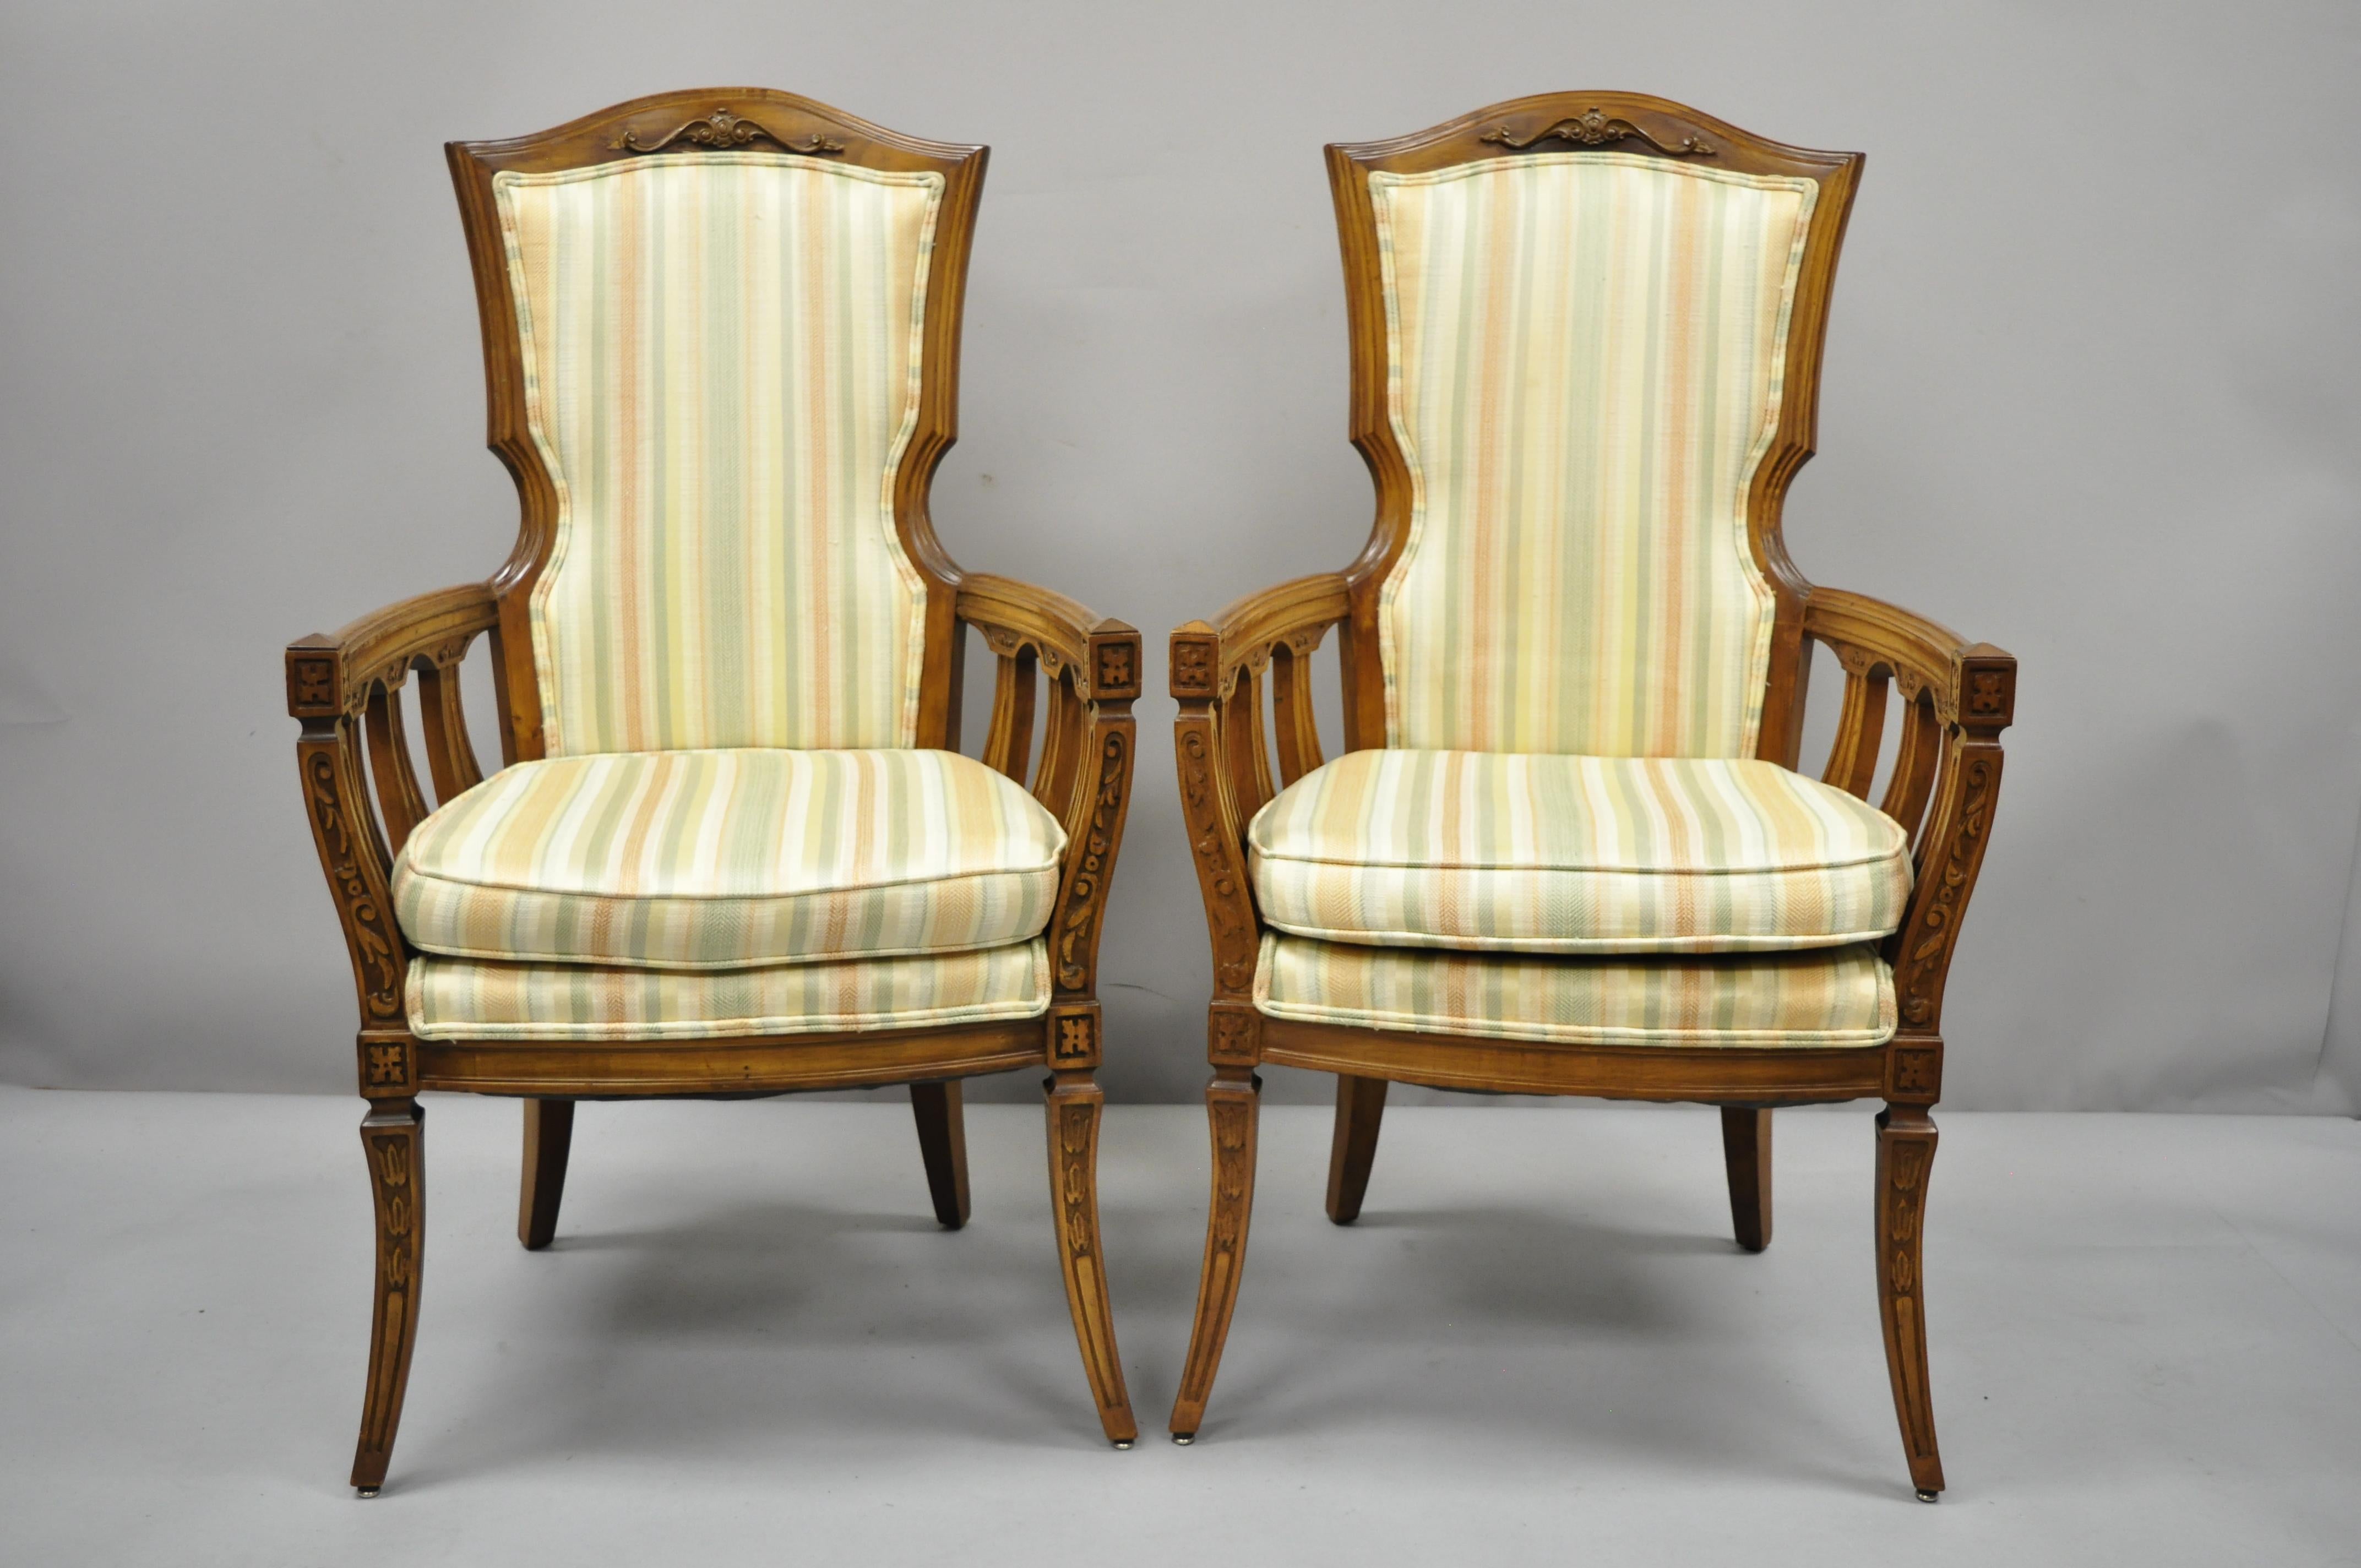 Pair of vintage French provincial Hollywood Regency tall back lounge armchairs. Item features tall comfortable backs, solid wood frame, nicely carved details, tapered legs, great style and form. Mid-20th century. Measurements: 44.5